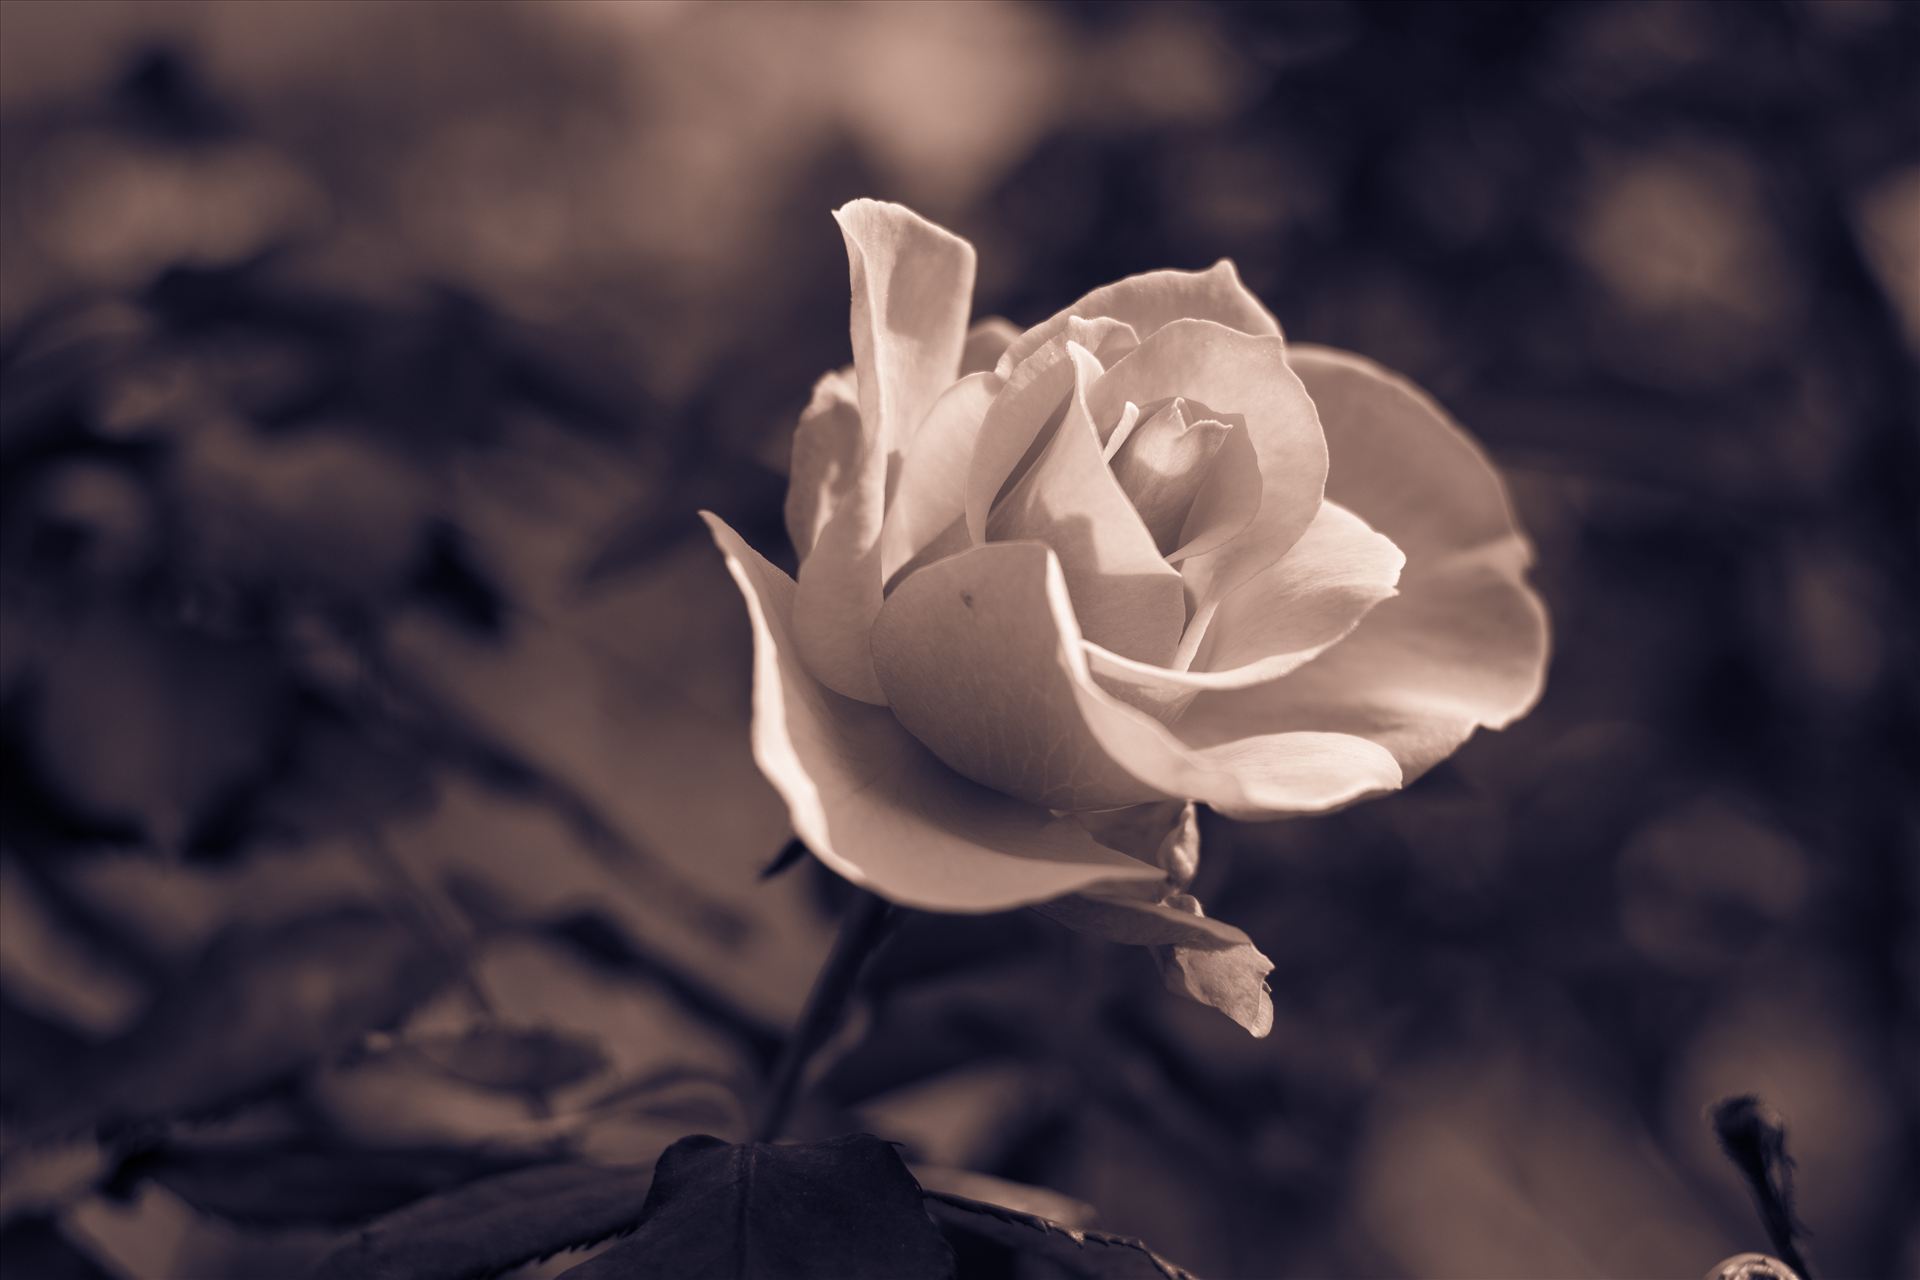 By Any Other Name 10272015.jpg Beautiful rose in monotone color on Central Coast of California by Sarah Williams